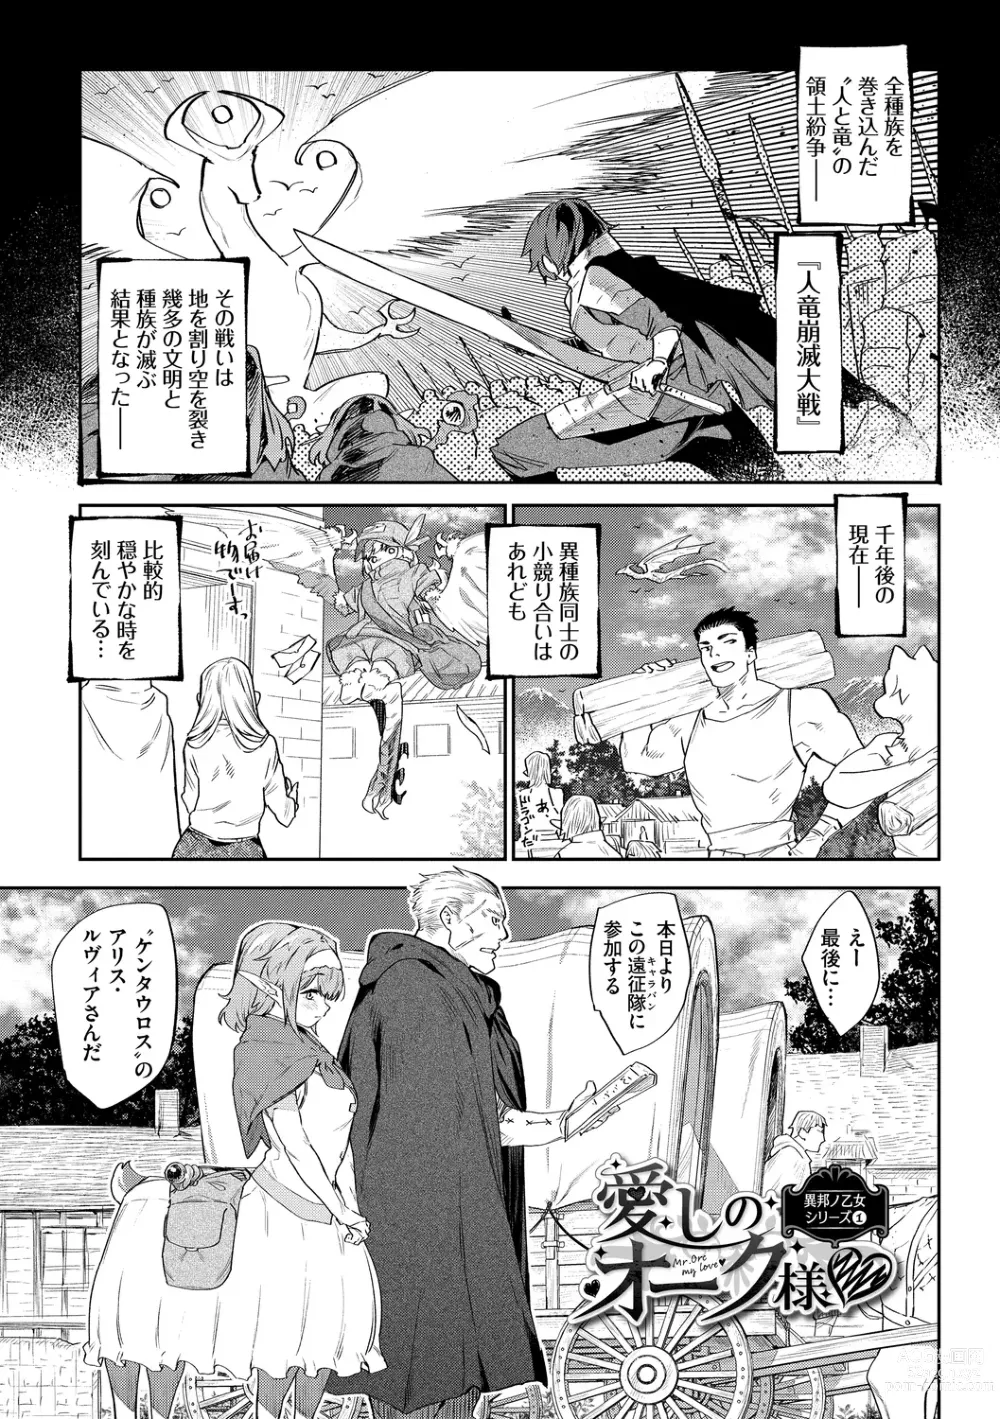 Page 3 of manga Ihou no Otome - Monster Girls in Another World